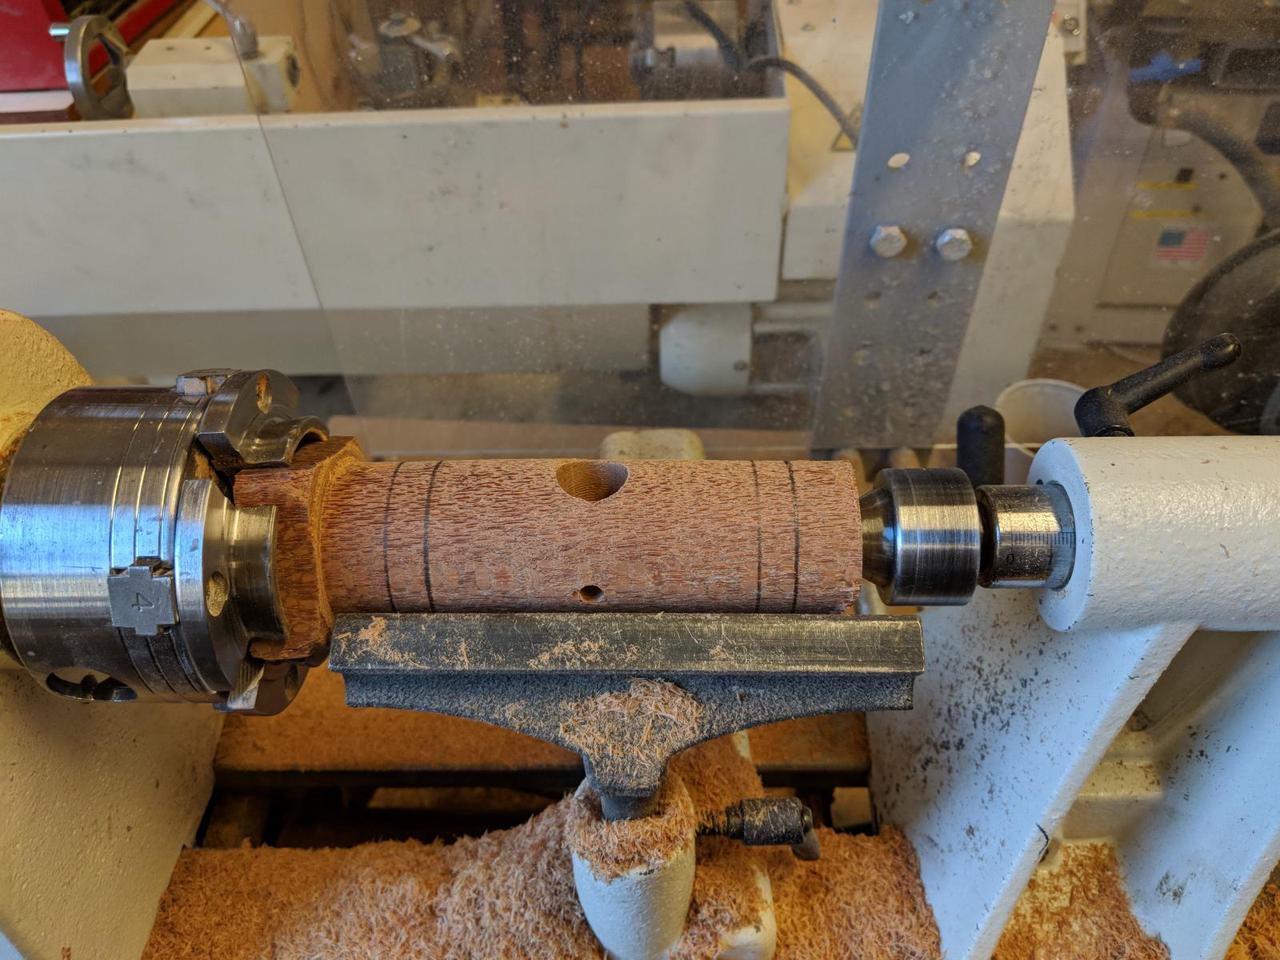 lacewood cylinder mounted on wood lathe with pencil marks drawn around circumference in four places.